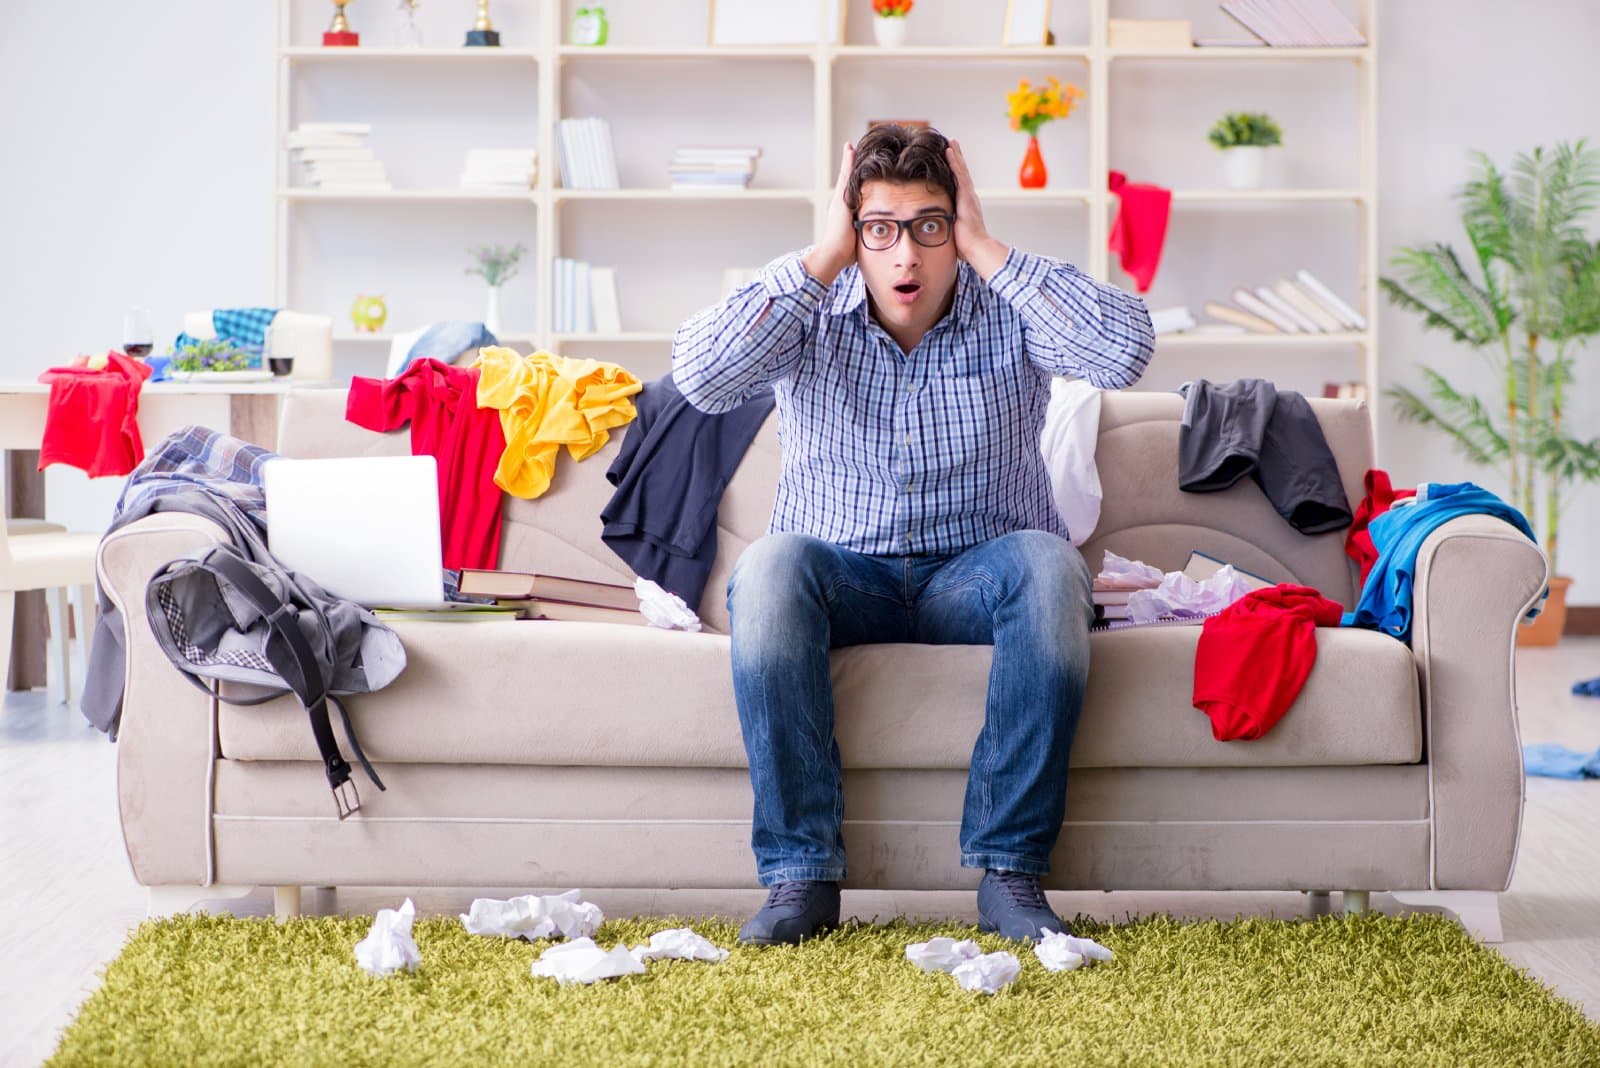 <p class="wp-caption-text">Image Credit: Shutterstock / Elnur</p>  <p>Neglecting personal cleanliness, especially in close quarters, can make shared spaces uncomfortable.</p>